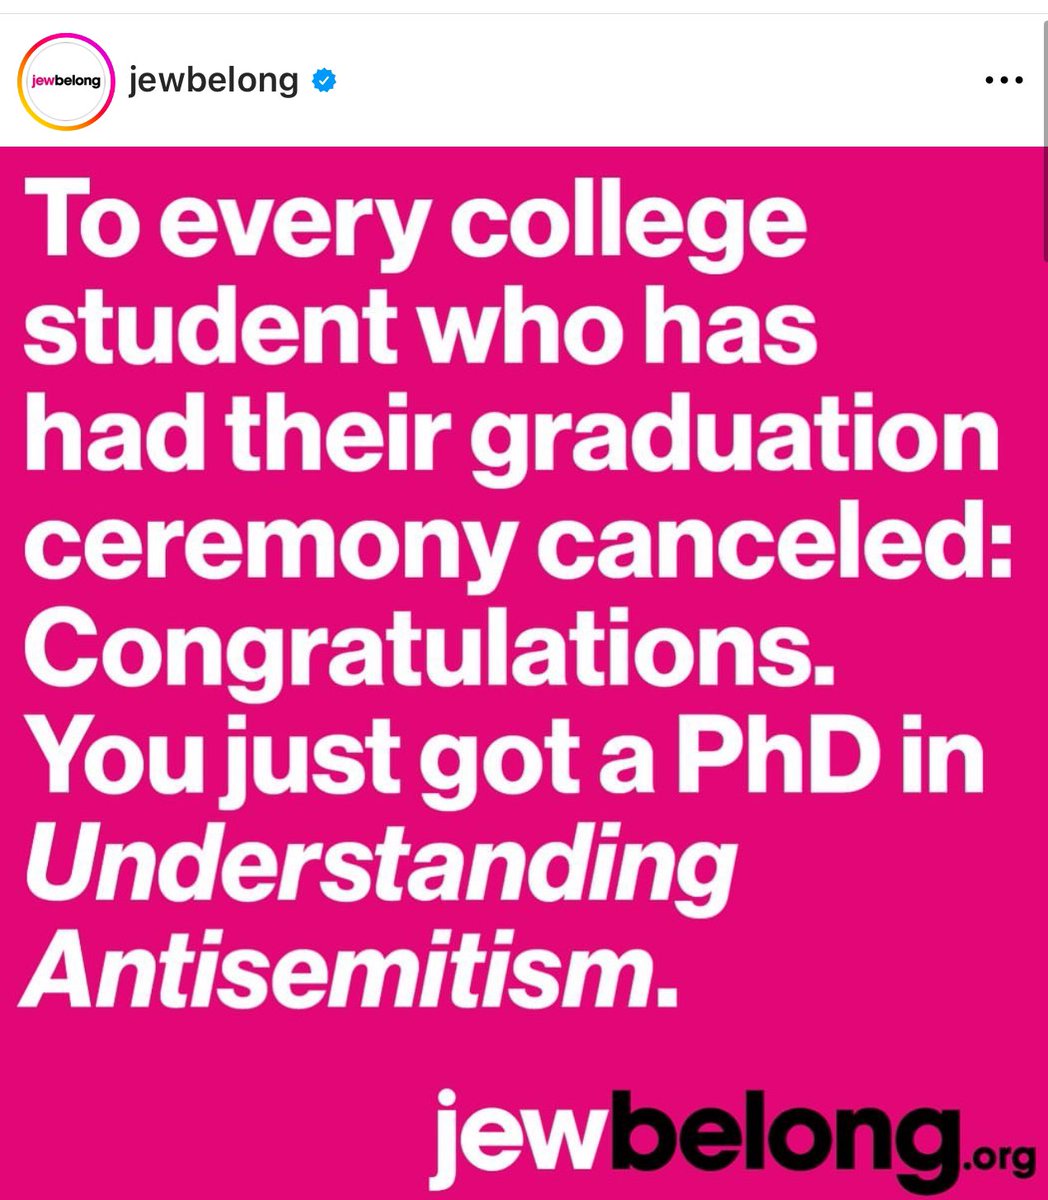 Raise your hand if you got a PhD in Understanding Antisemitism